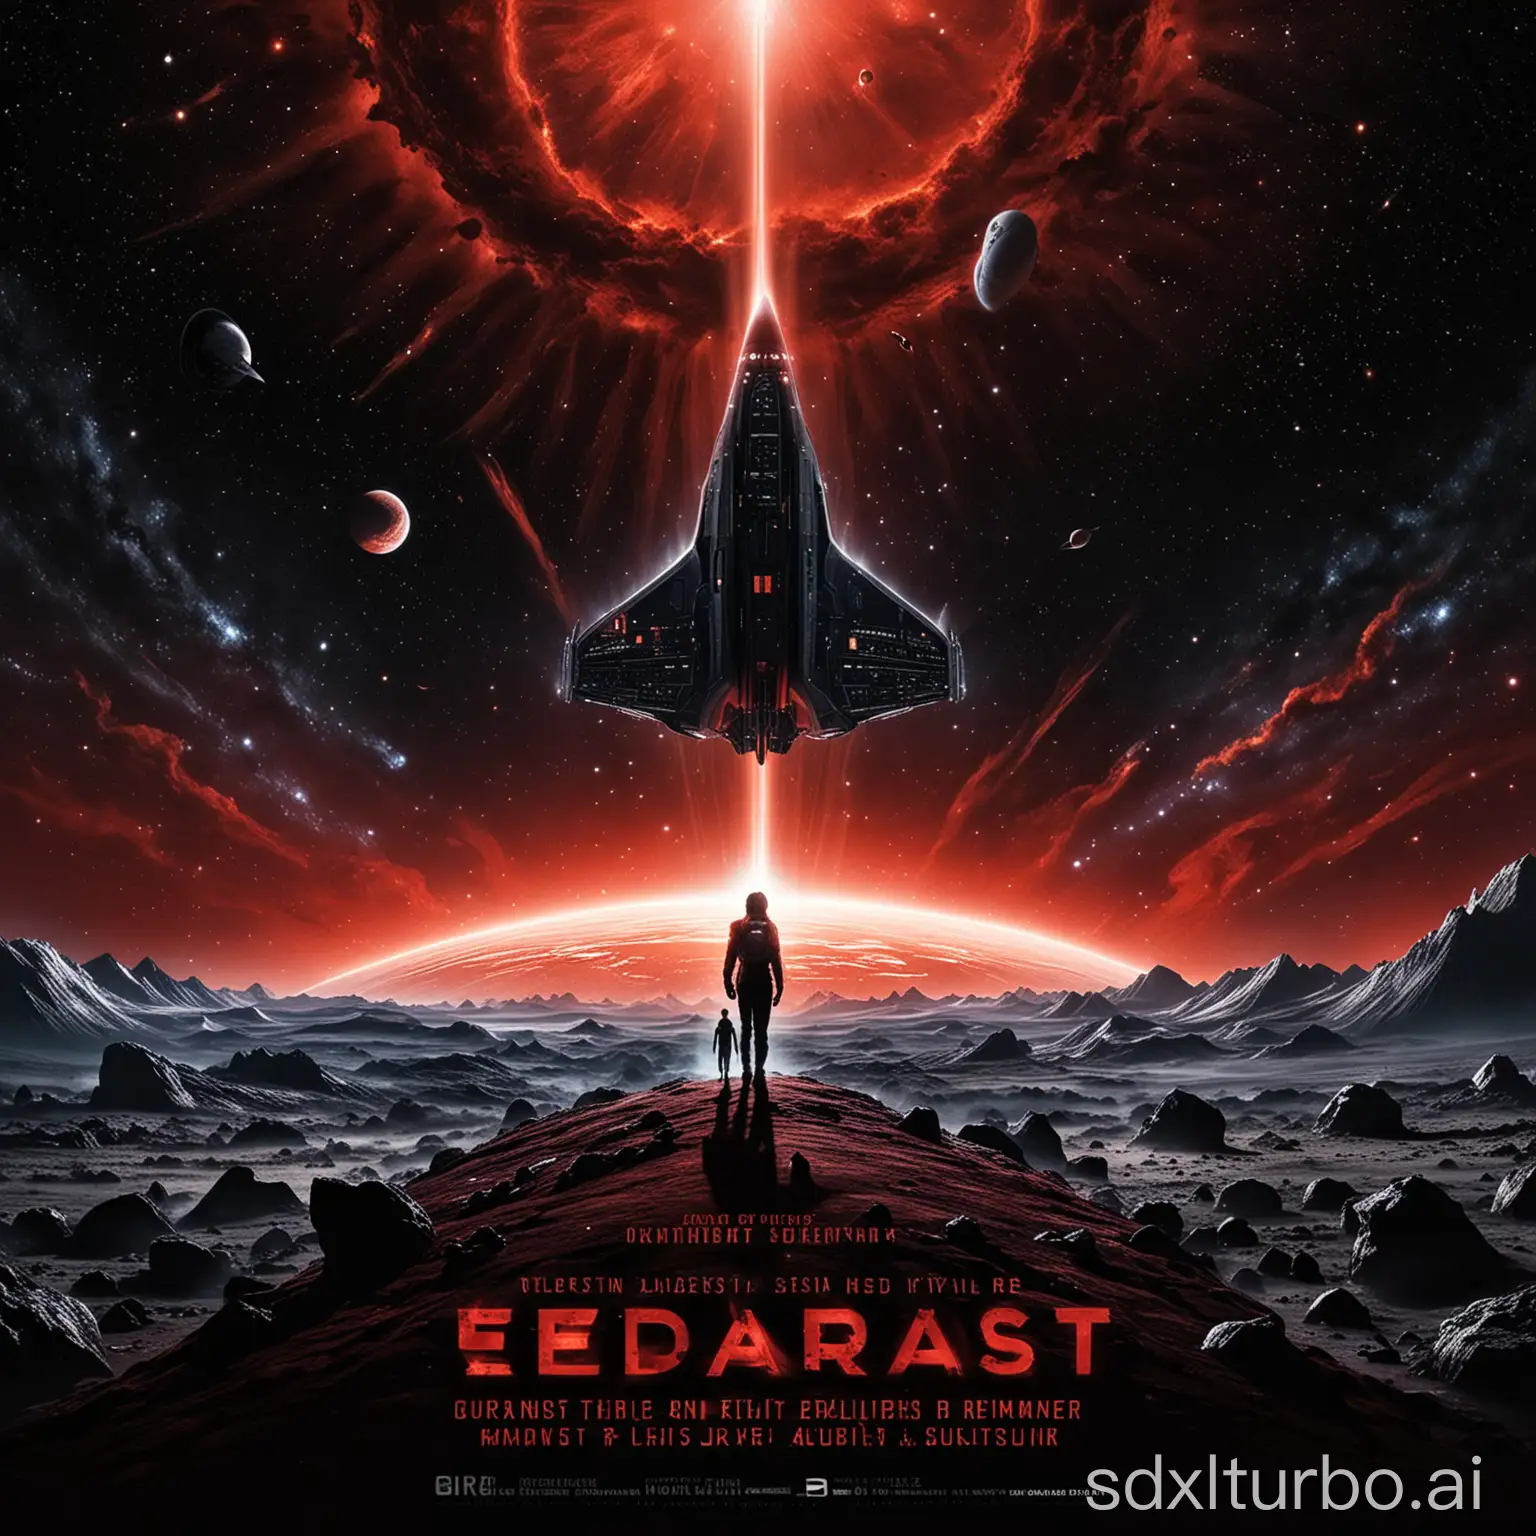 In the deep expanse of the universe, the poster displays the striking title of "Red Dust Light" in the center, with a modern and science fiction font. Dr. Elia and her brother Moyuan stand in front of the silhouette of a streamlined interstellar spaceship, their figures appearing brave and resolute in the reflection of starlight. Around the spaceship, scattered red stardust particles seem to be the dust of the universe telling unknown secrets. Beams of light extend from the rear of the spaceship, suggesting a huge cosmic rift, adding a touch of mystery and urgency. In one corner of the poster, a small black cat named "September" sits quietly, adding a touch of warmth to this technologically rich scene. The entire poster is dominated by red and black tones, creating a warm and mysterious atmosphere, attracting viewers to explore this story about interstellar exploration, family ties, and the unknown universe.